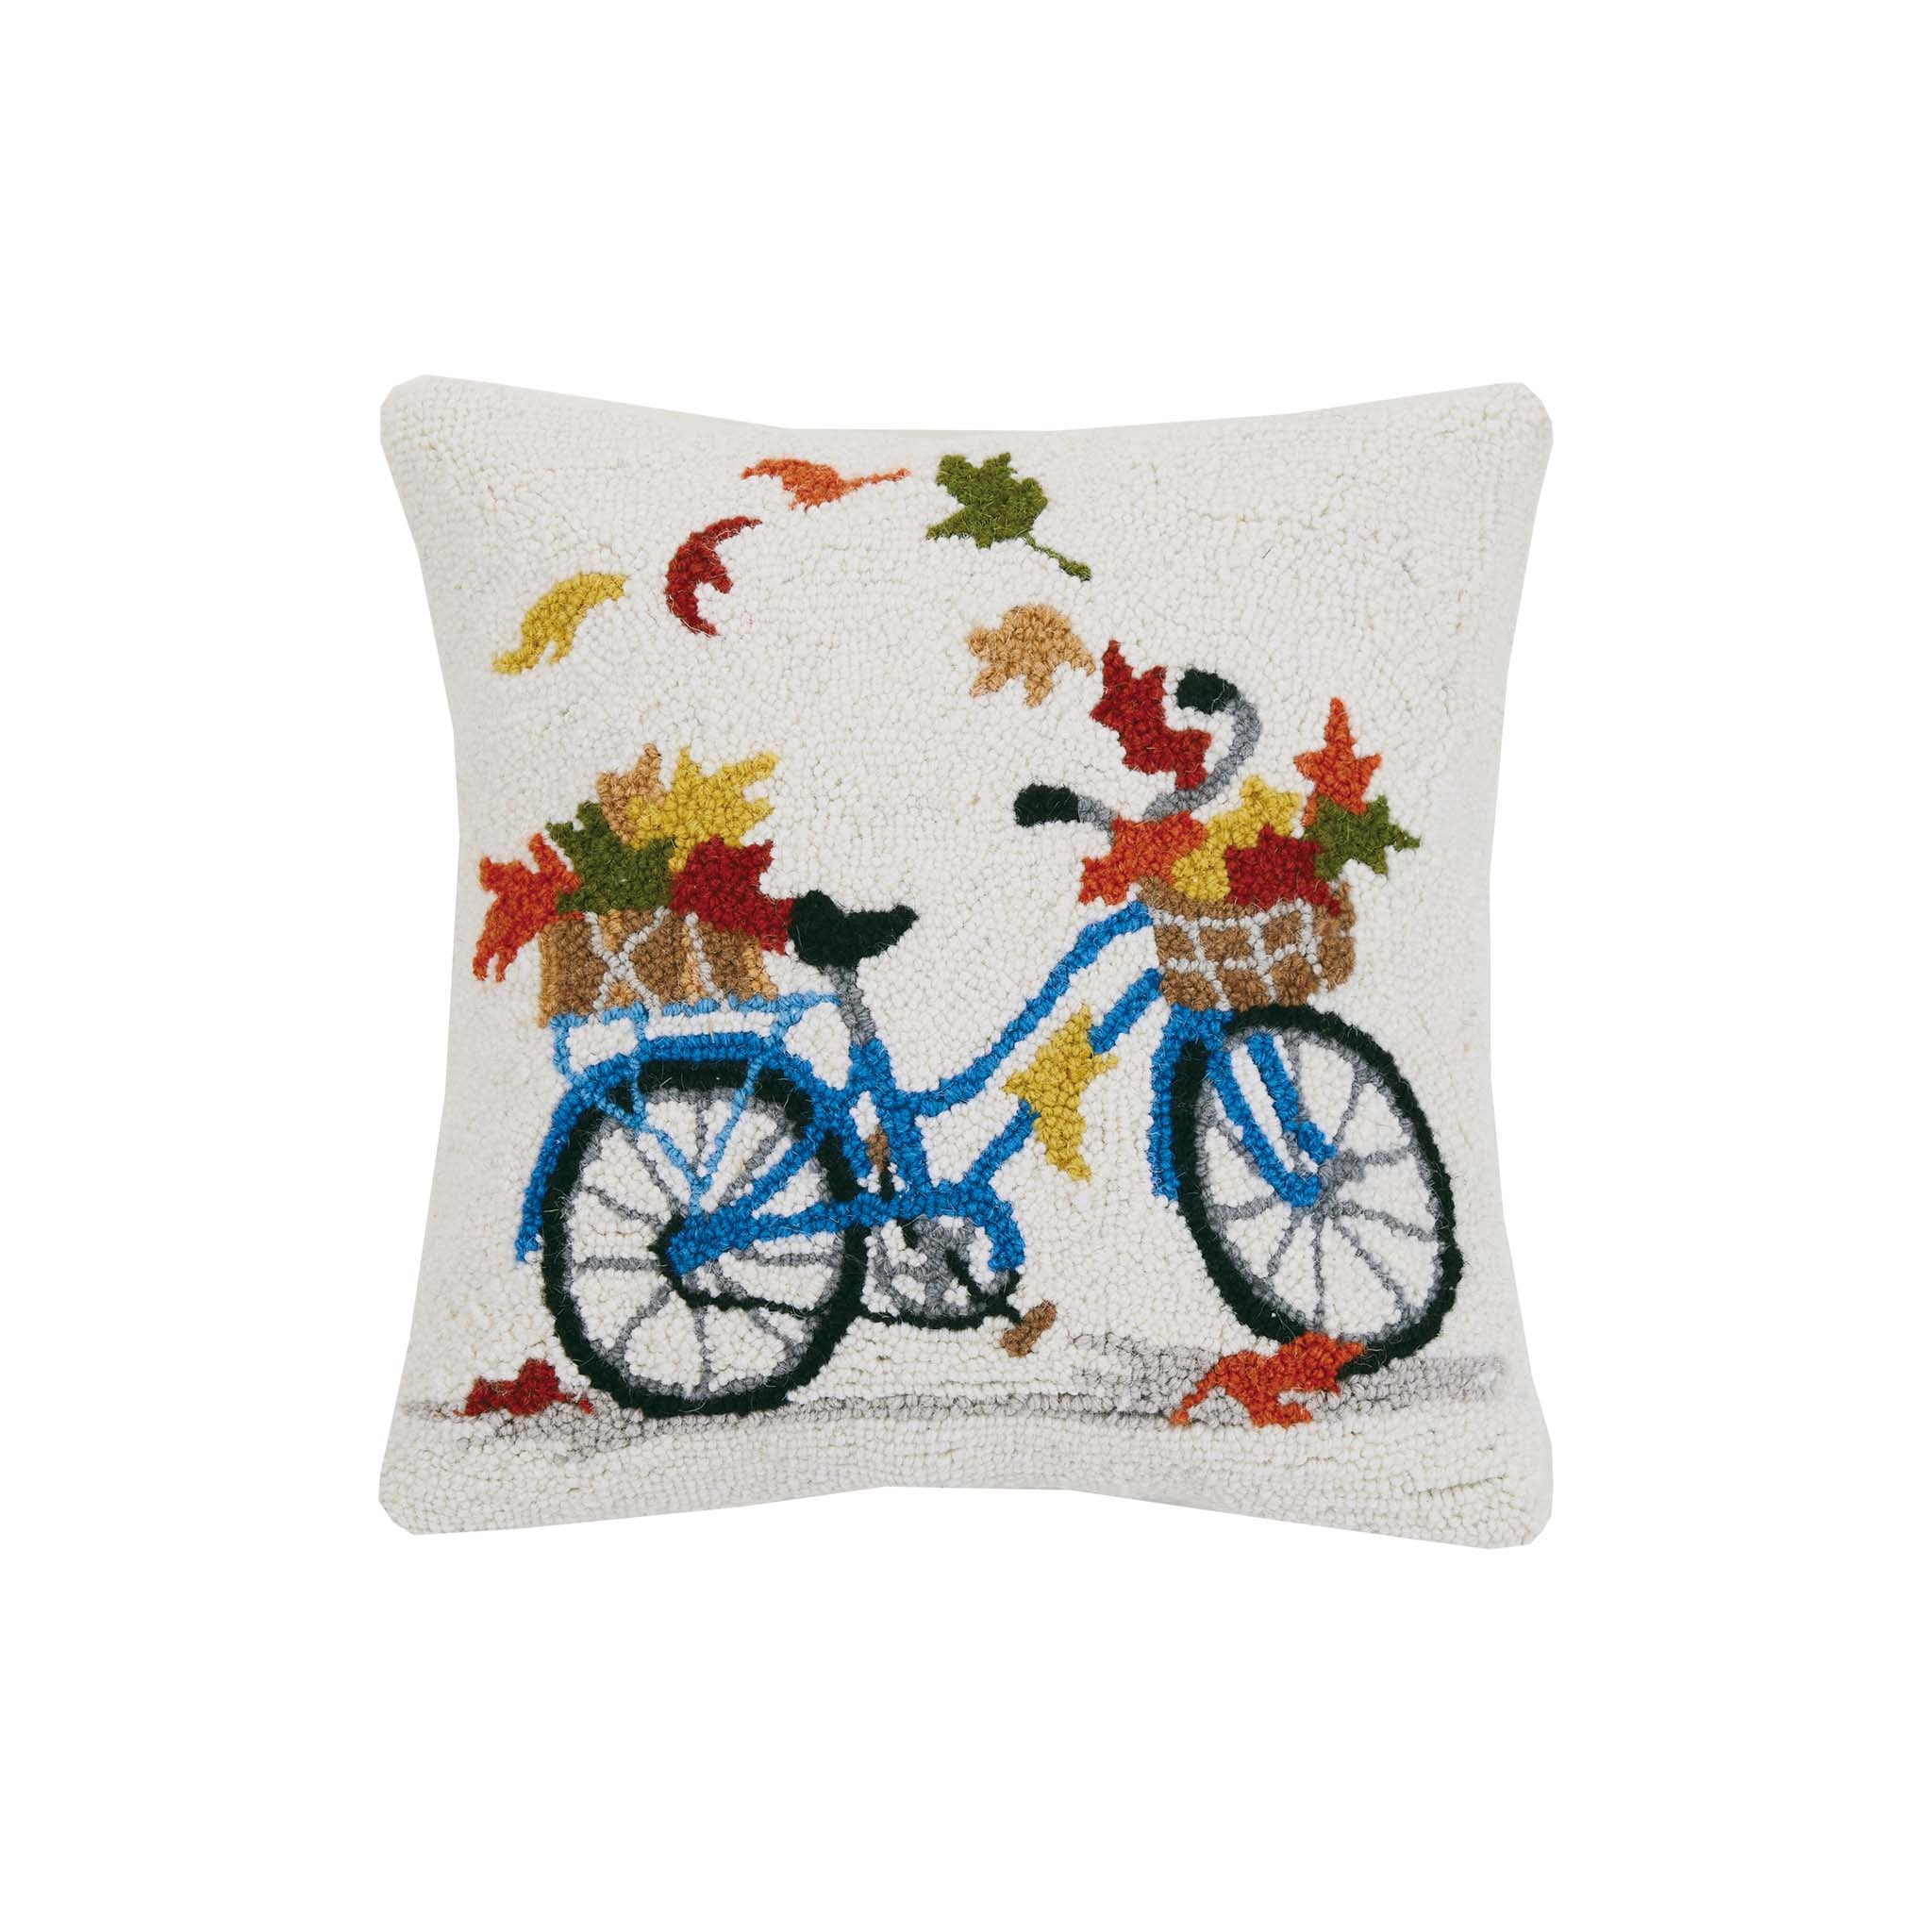 First Ride of Fall Hooked Pillow